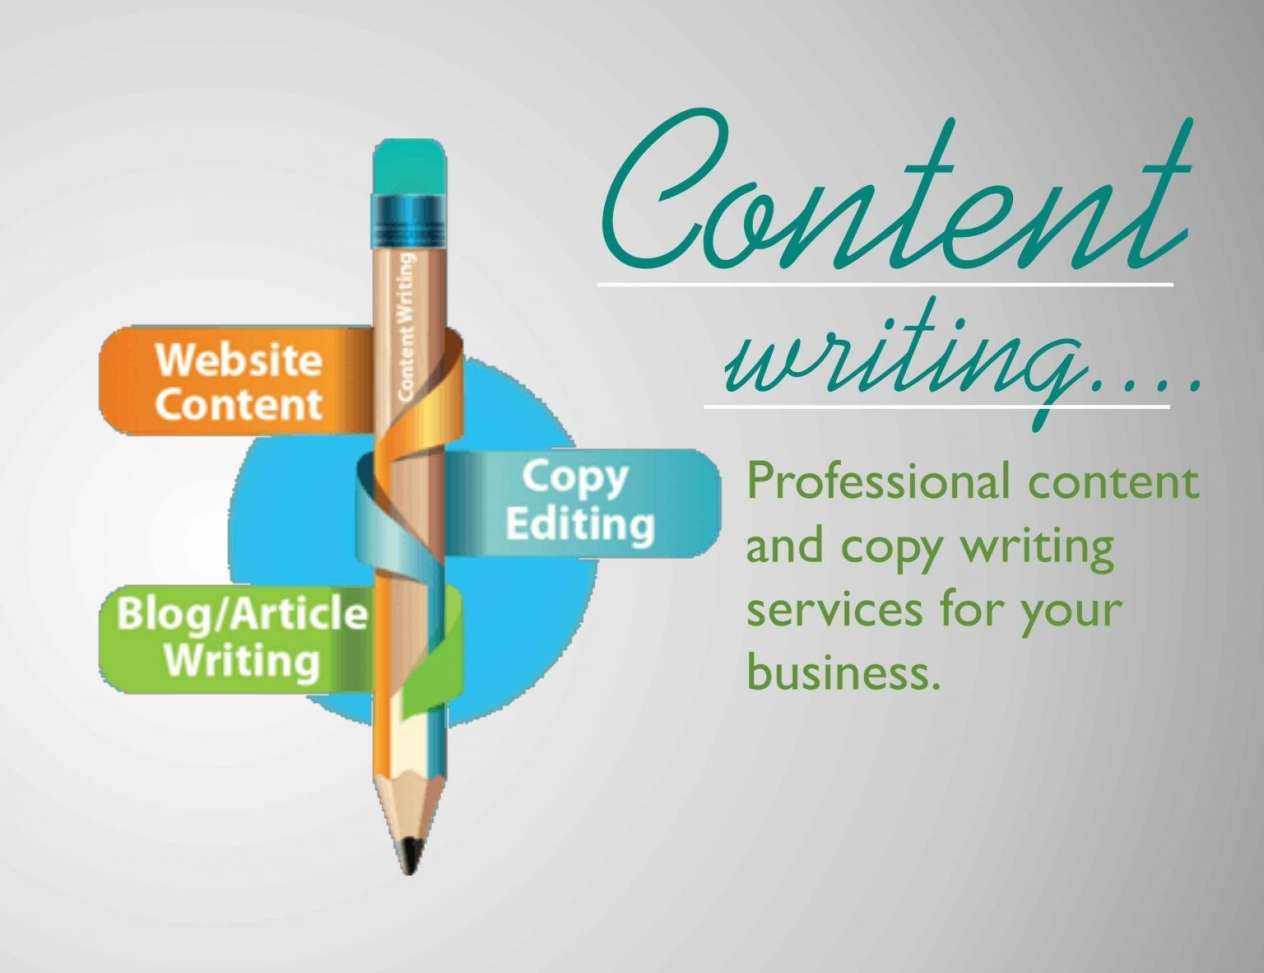 I will be your SEO content writer, article, and blog writer